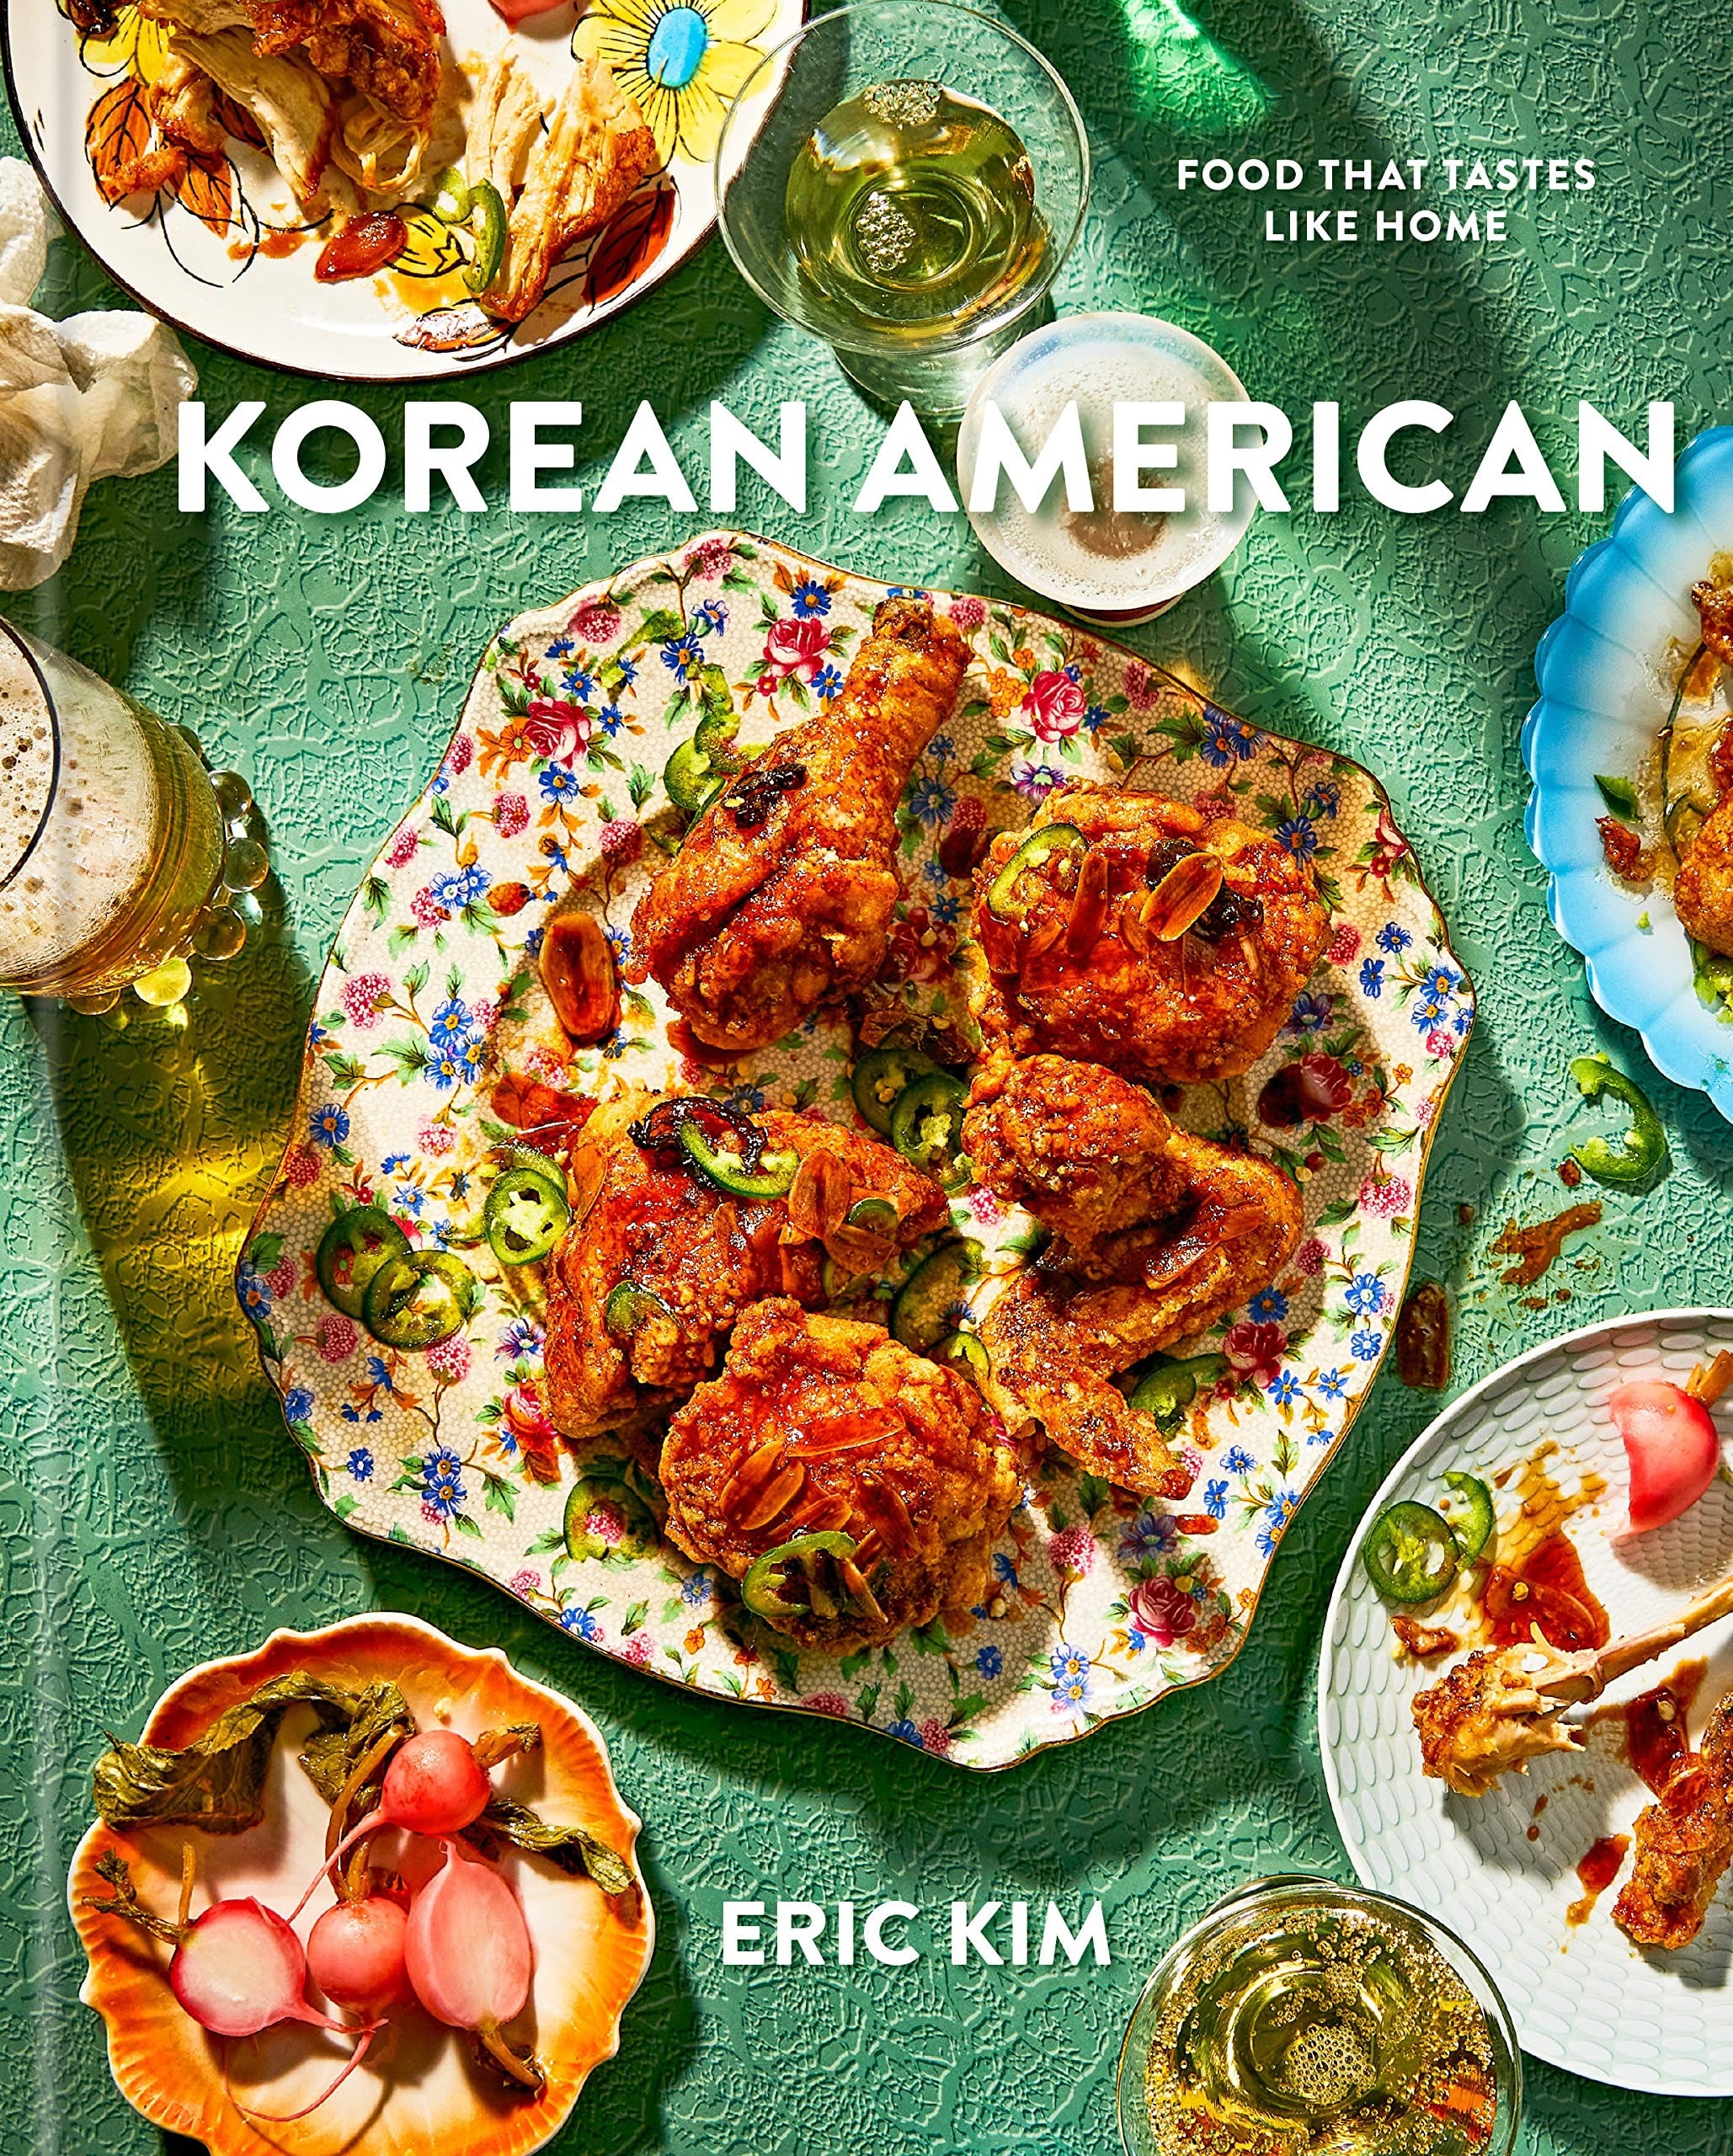 the green Korean American cookbook cover featuring a plate filled with chicken